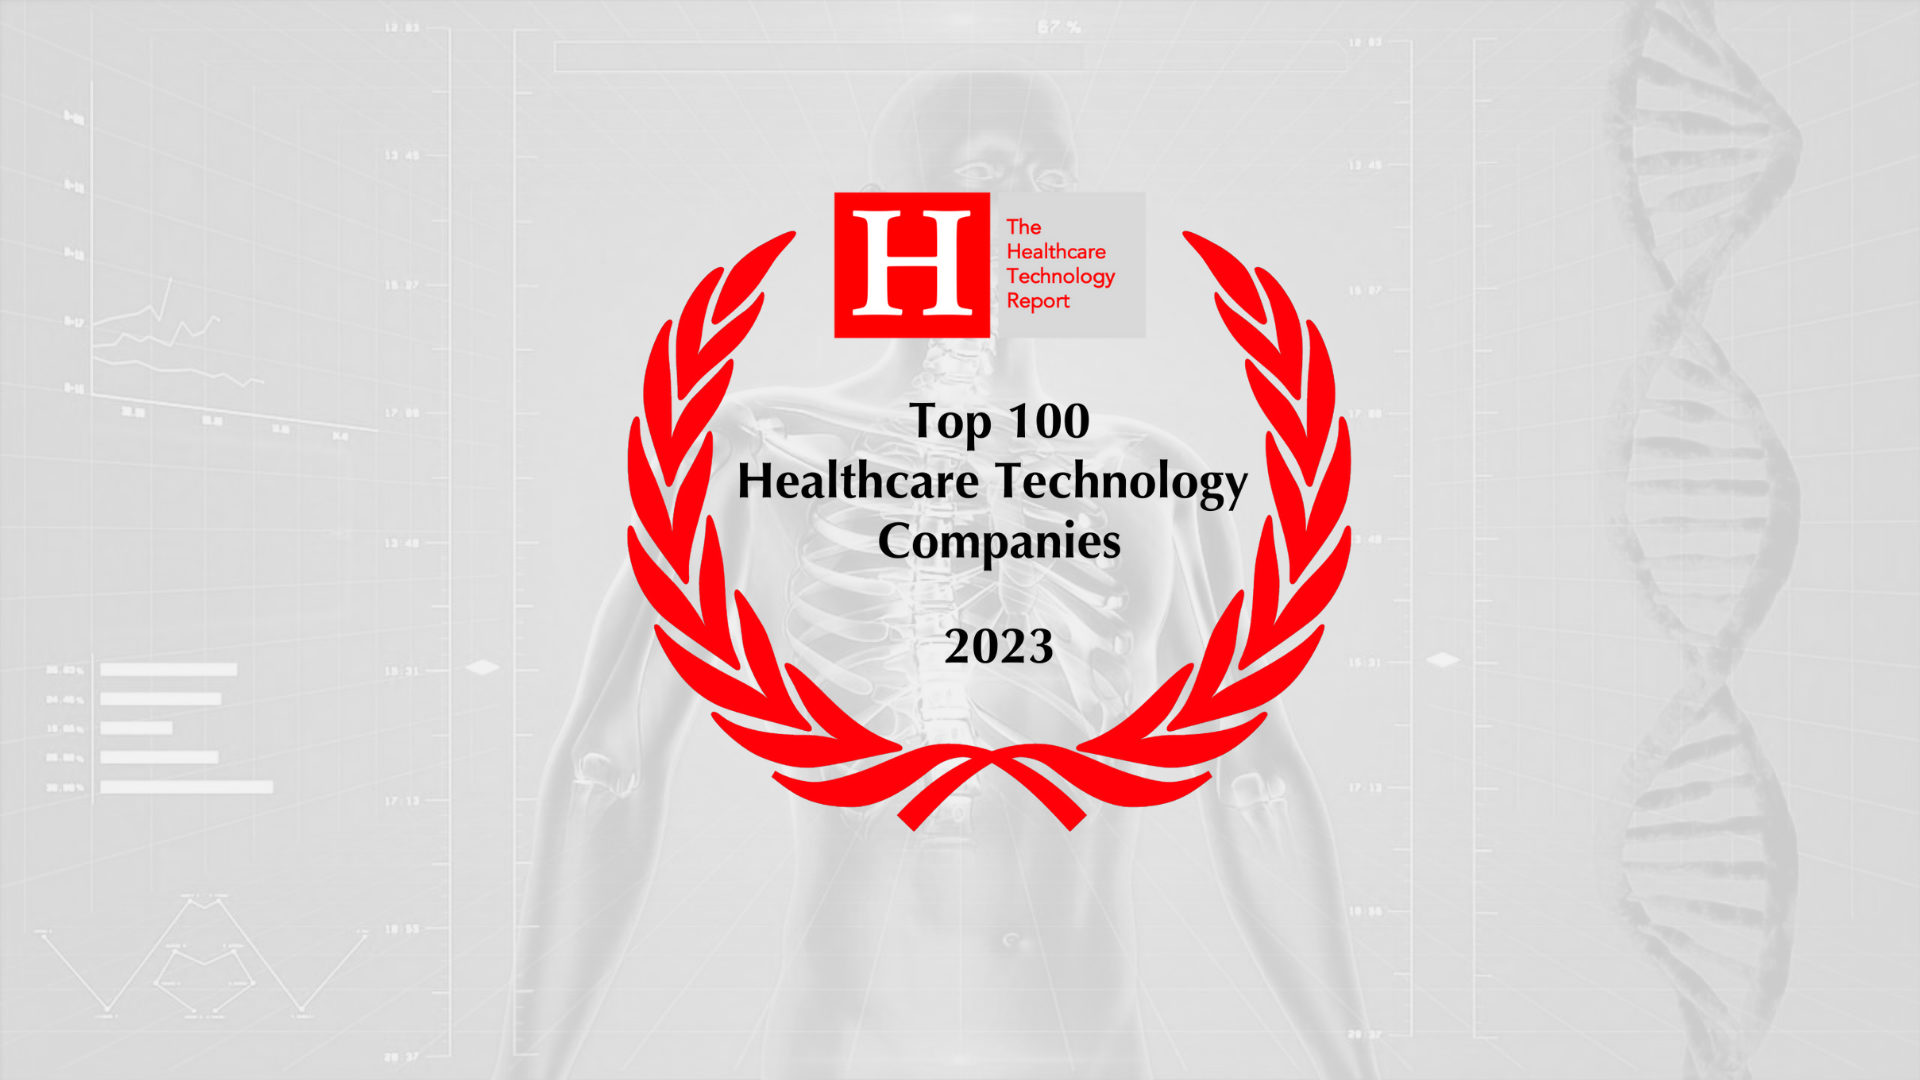 The Top 100 Healthcare Technology Companies of 2023